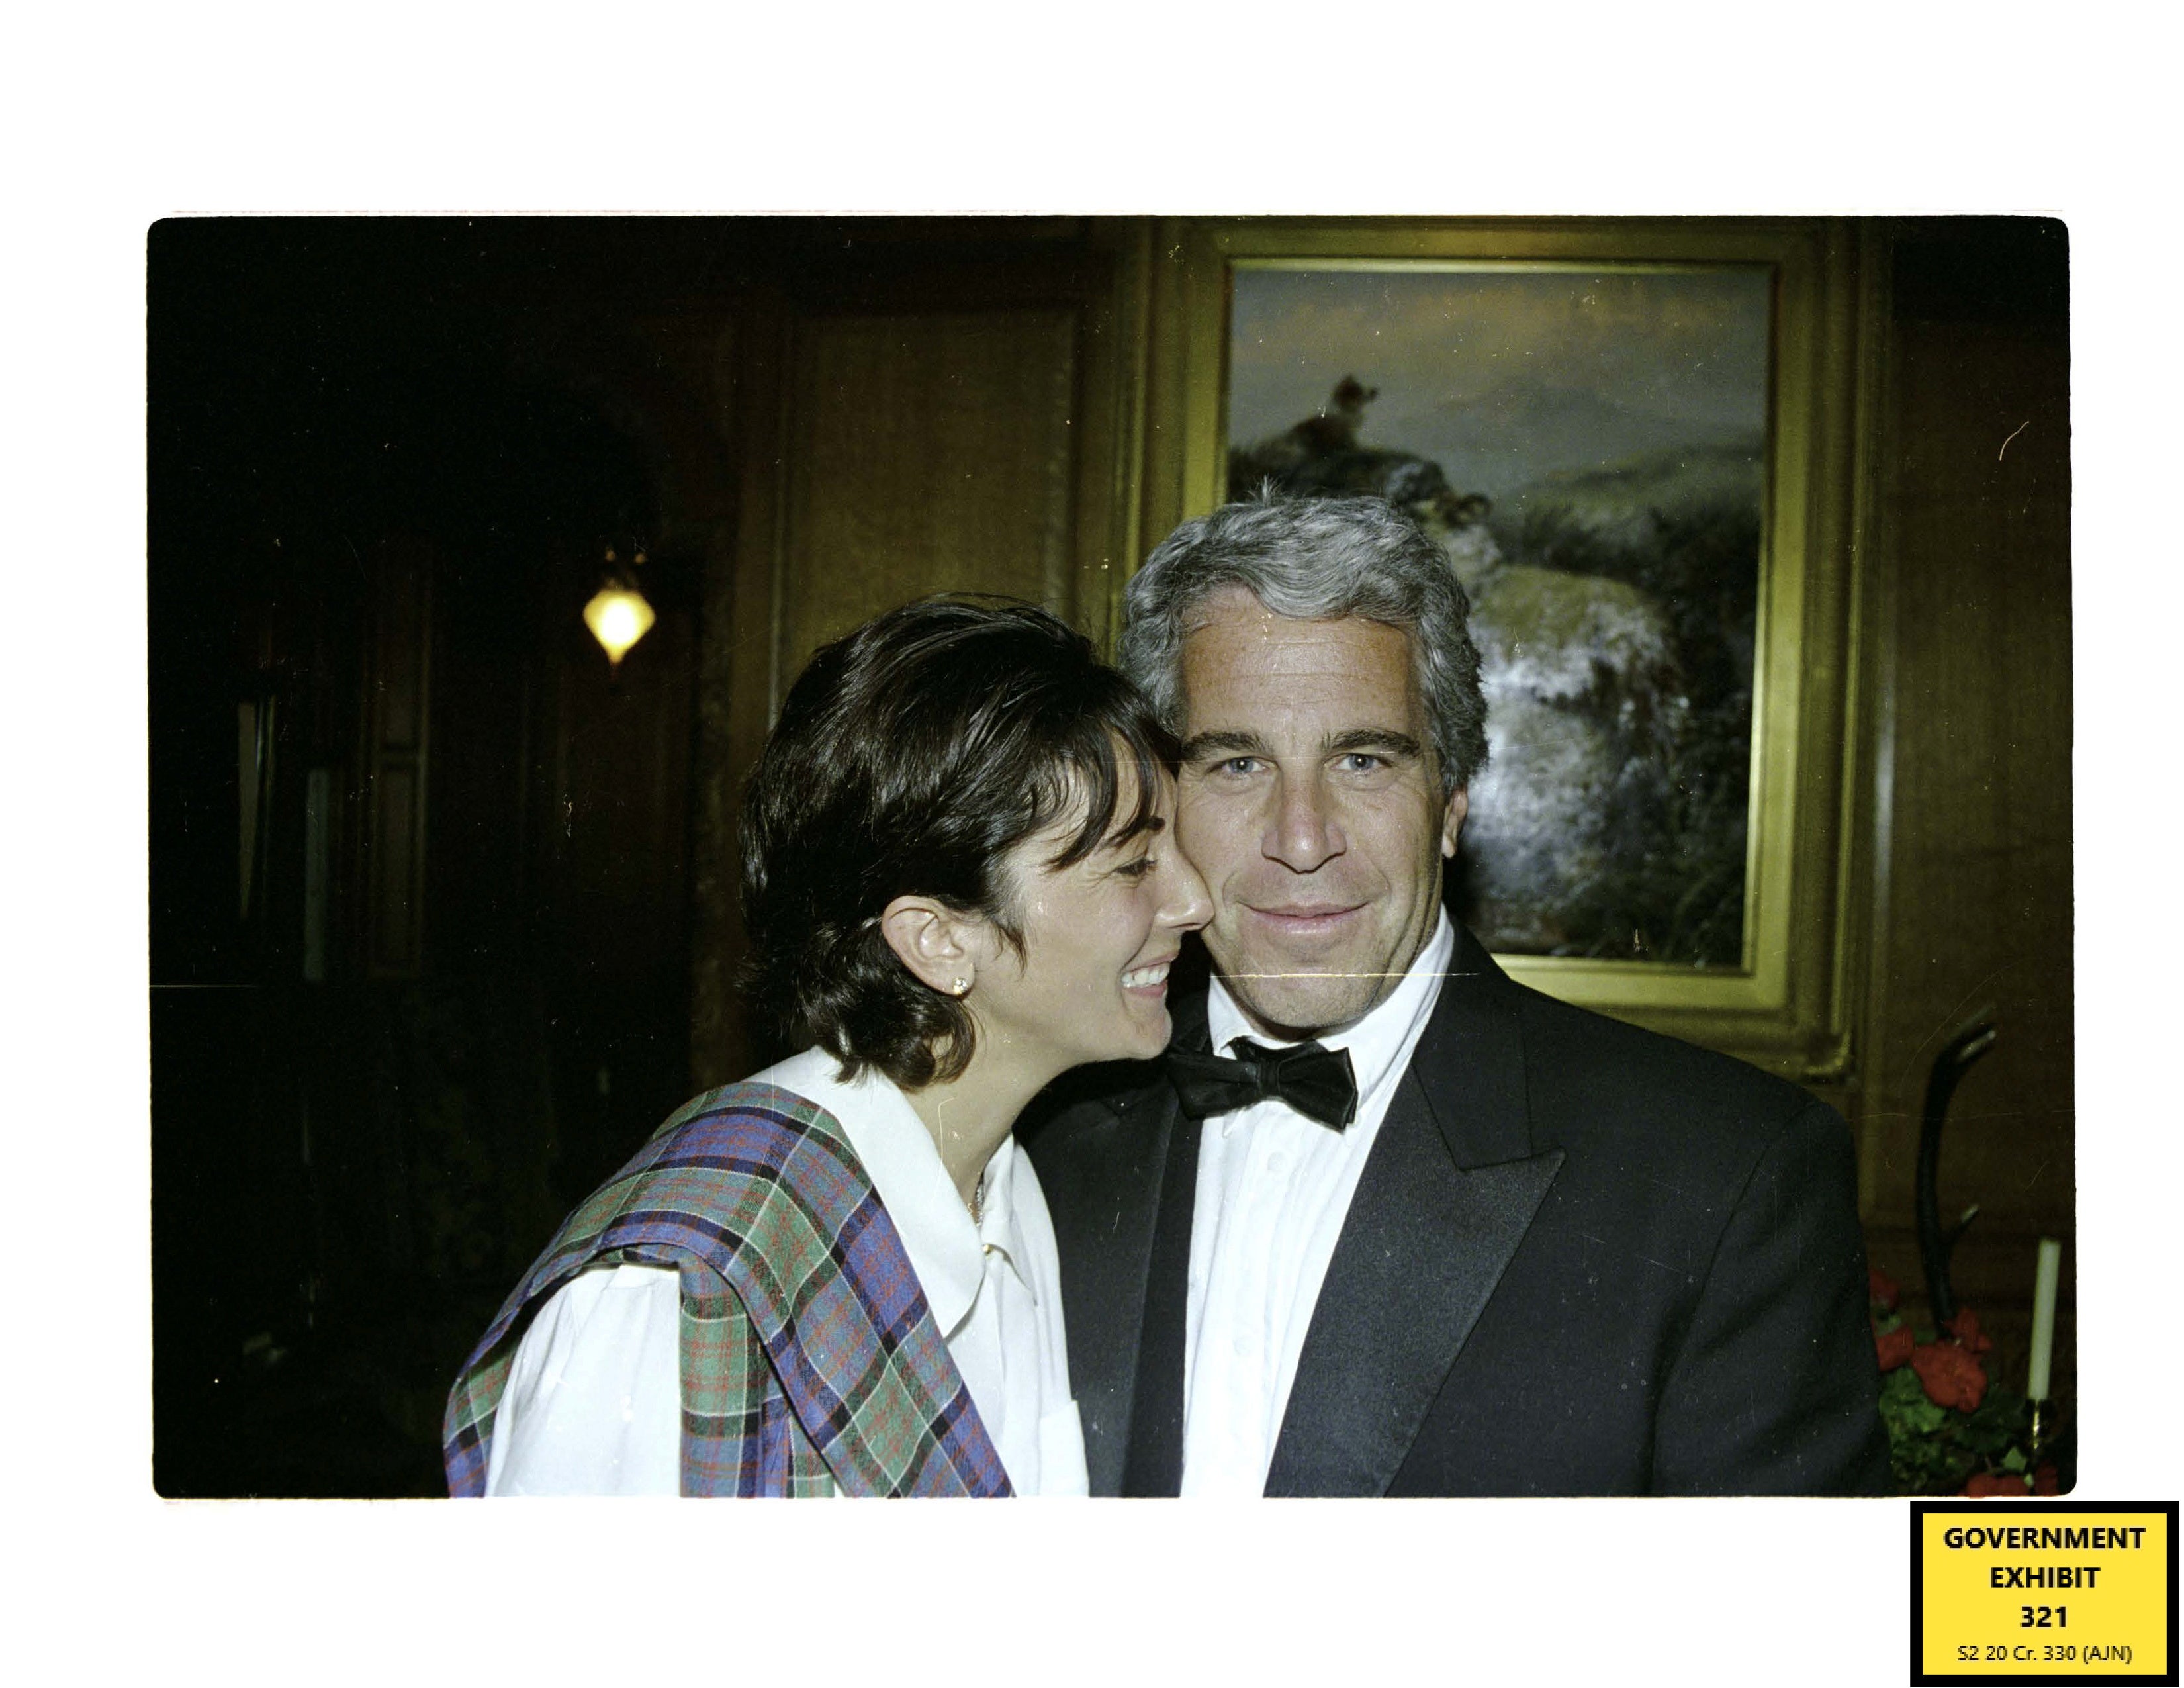 Epstein with his now-jailed friend Ghislaine Maxwell